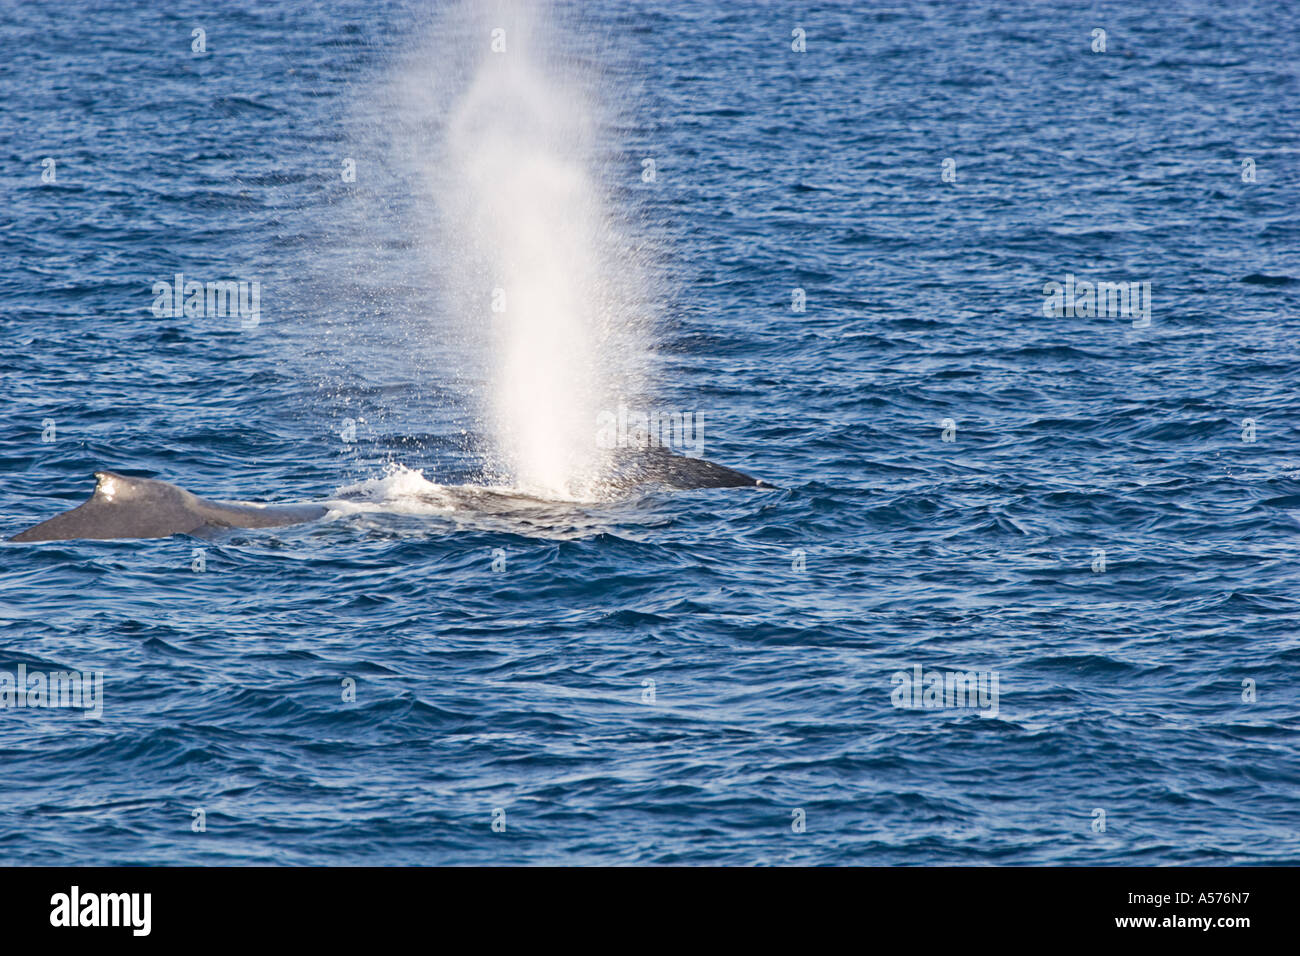 Humpback whales mother and baby Megaptera novaeangliae Stock Photo